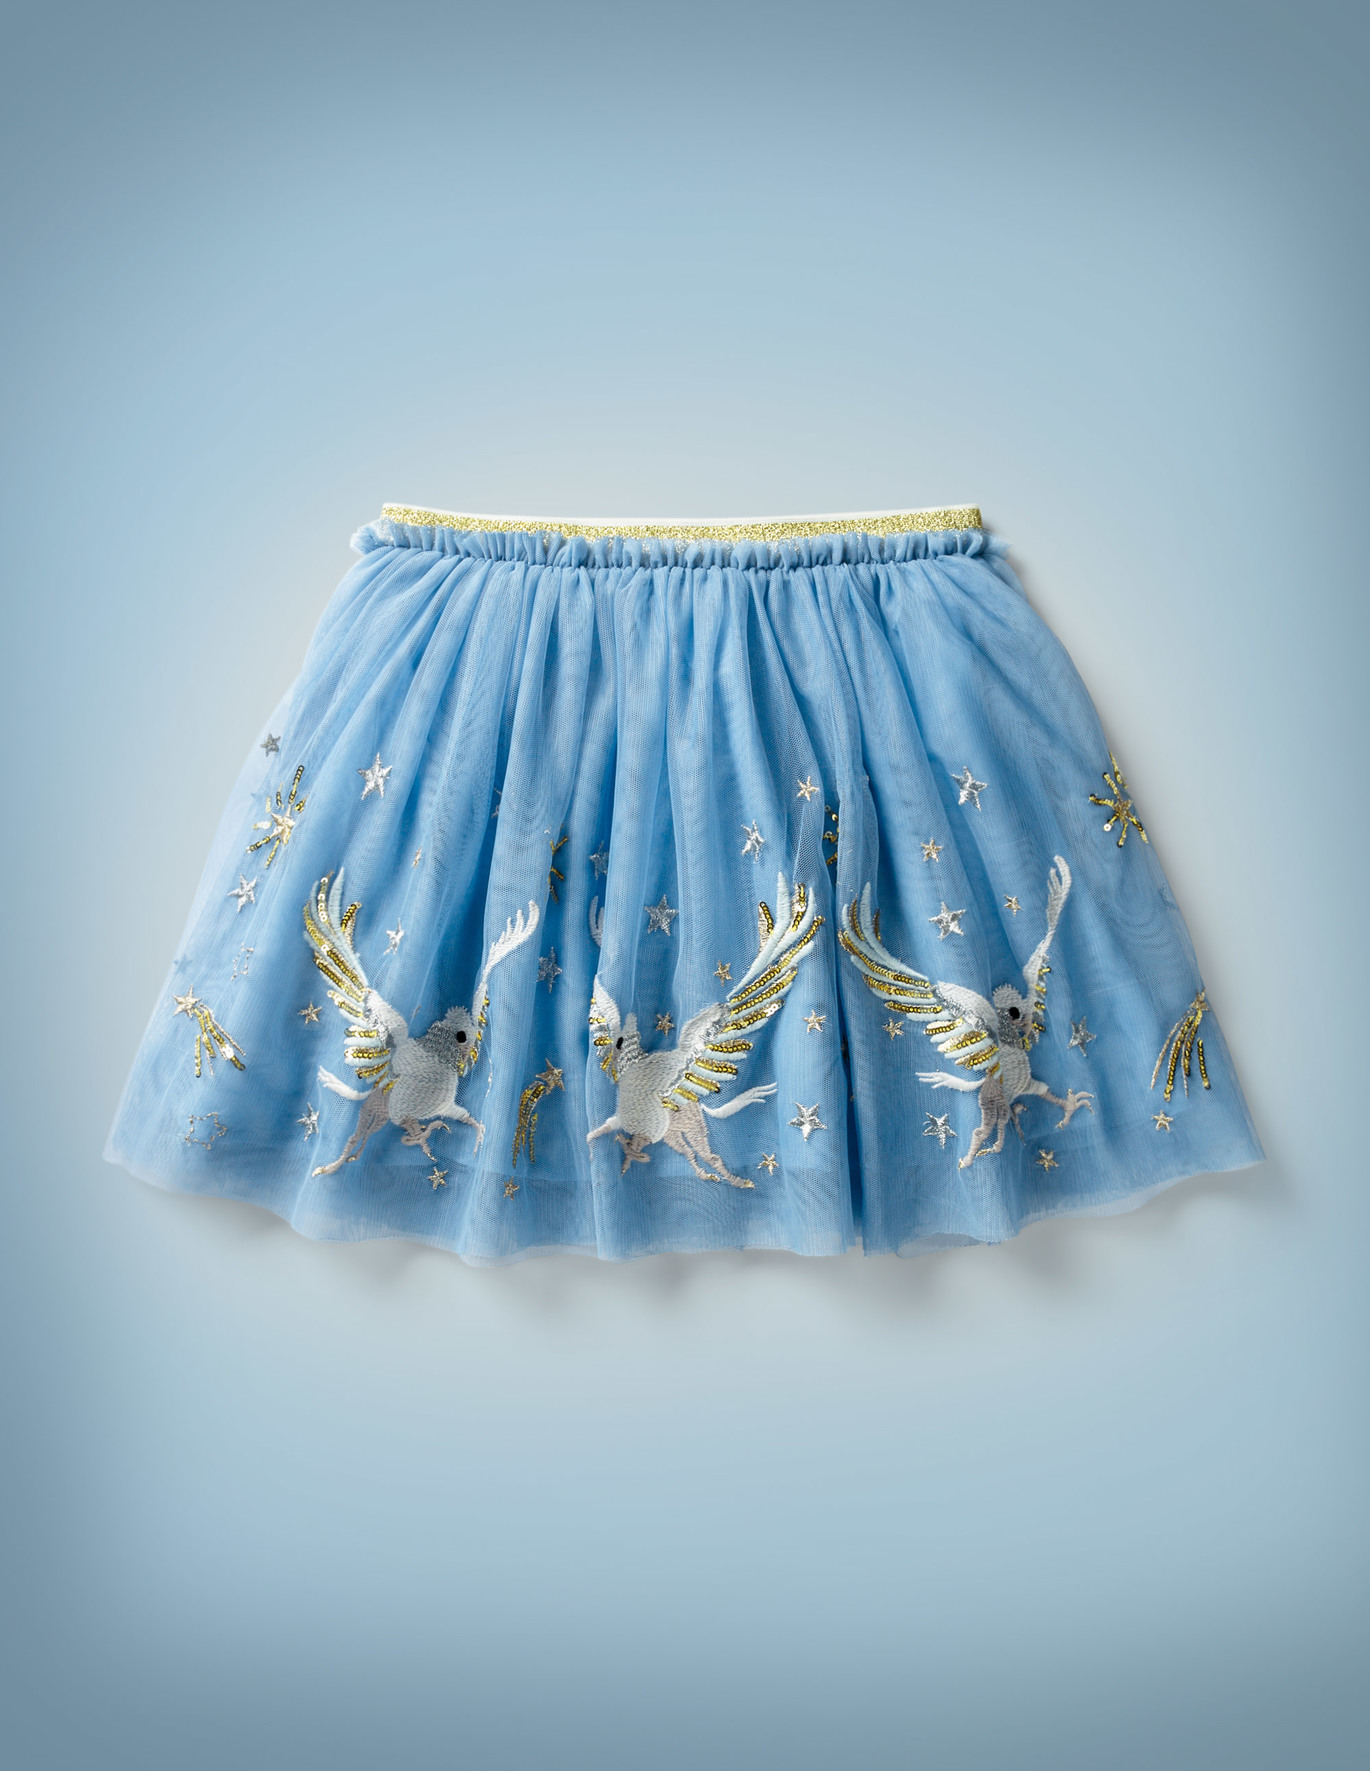 Hippogriff Tulle Skirt - Harry Potter Collection